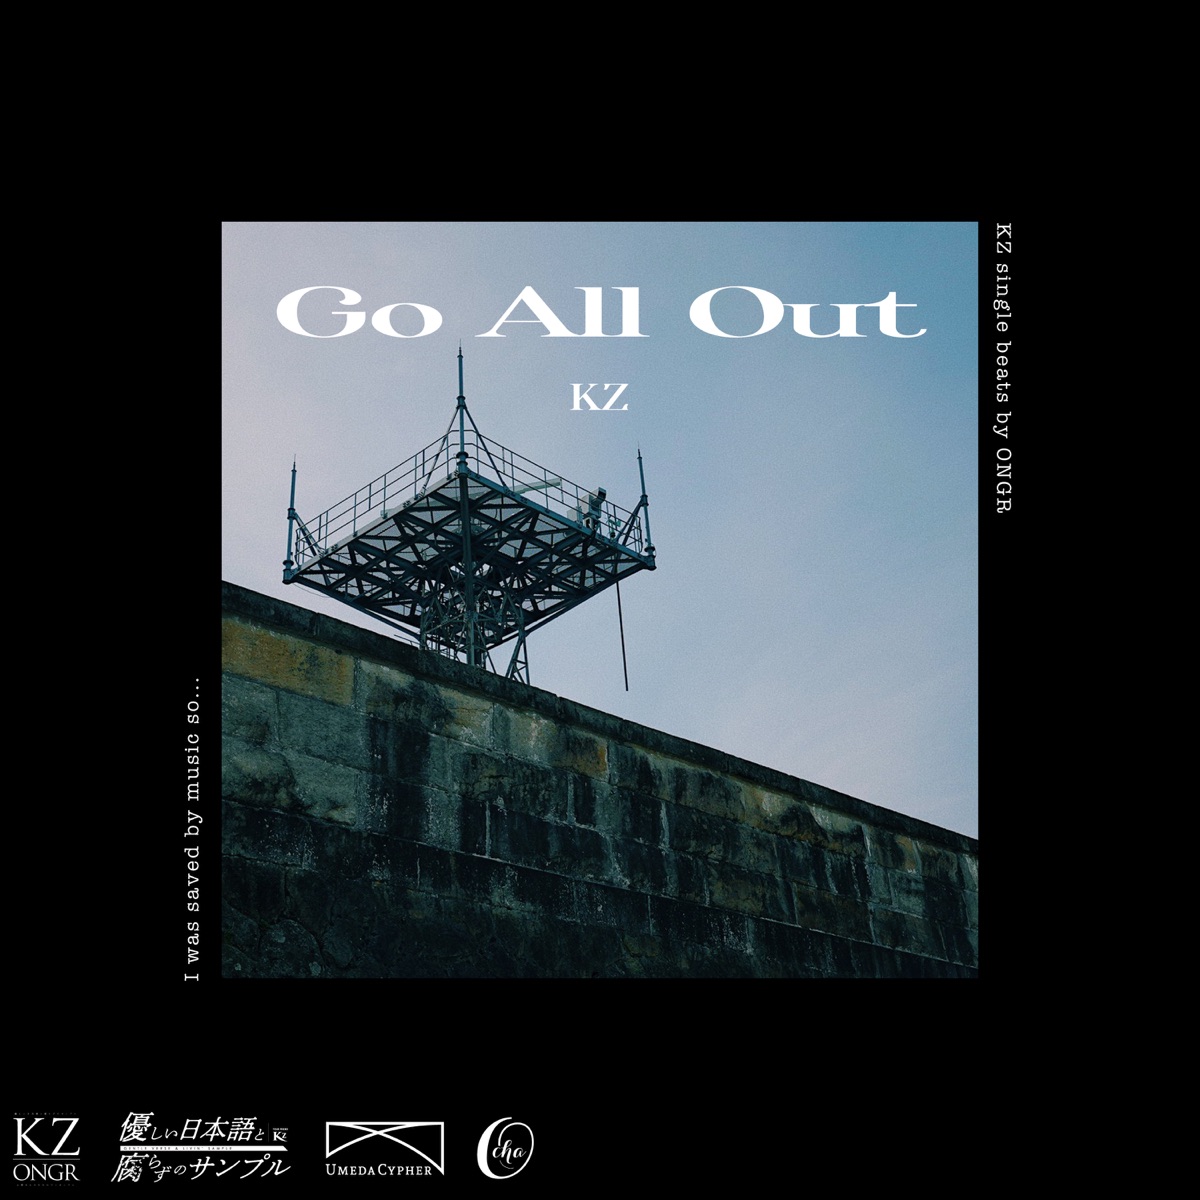 『KZ - Go All Out』収録の『Go All Out』ジャケット